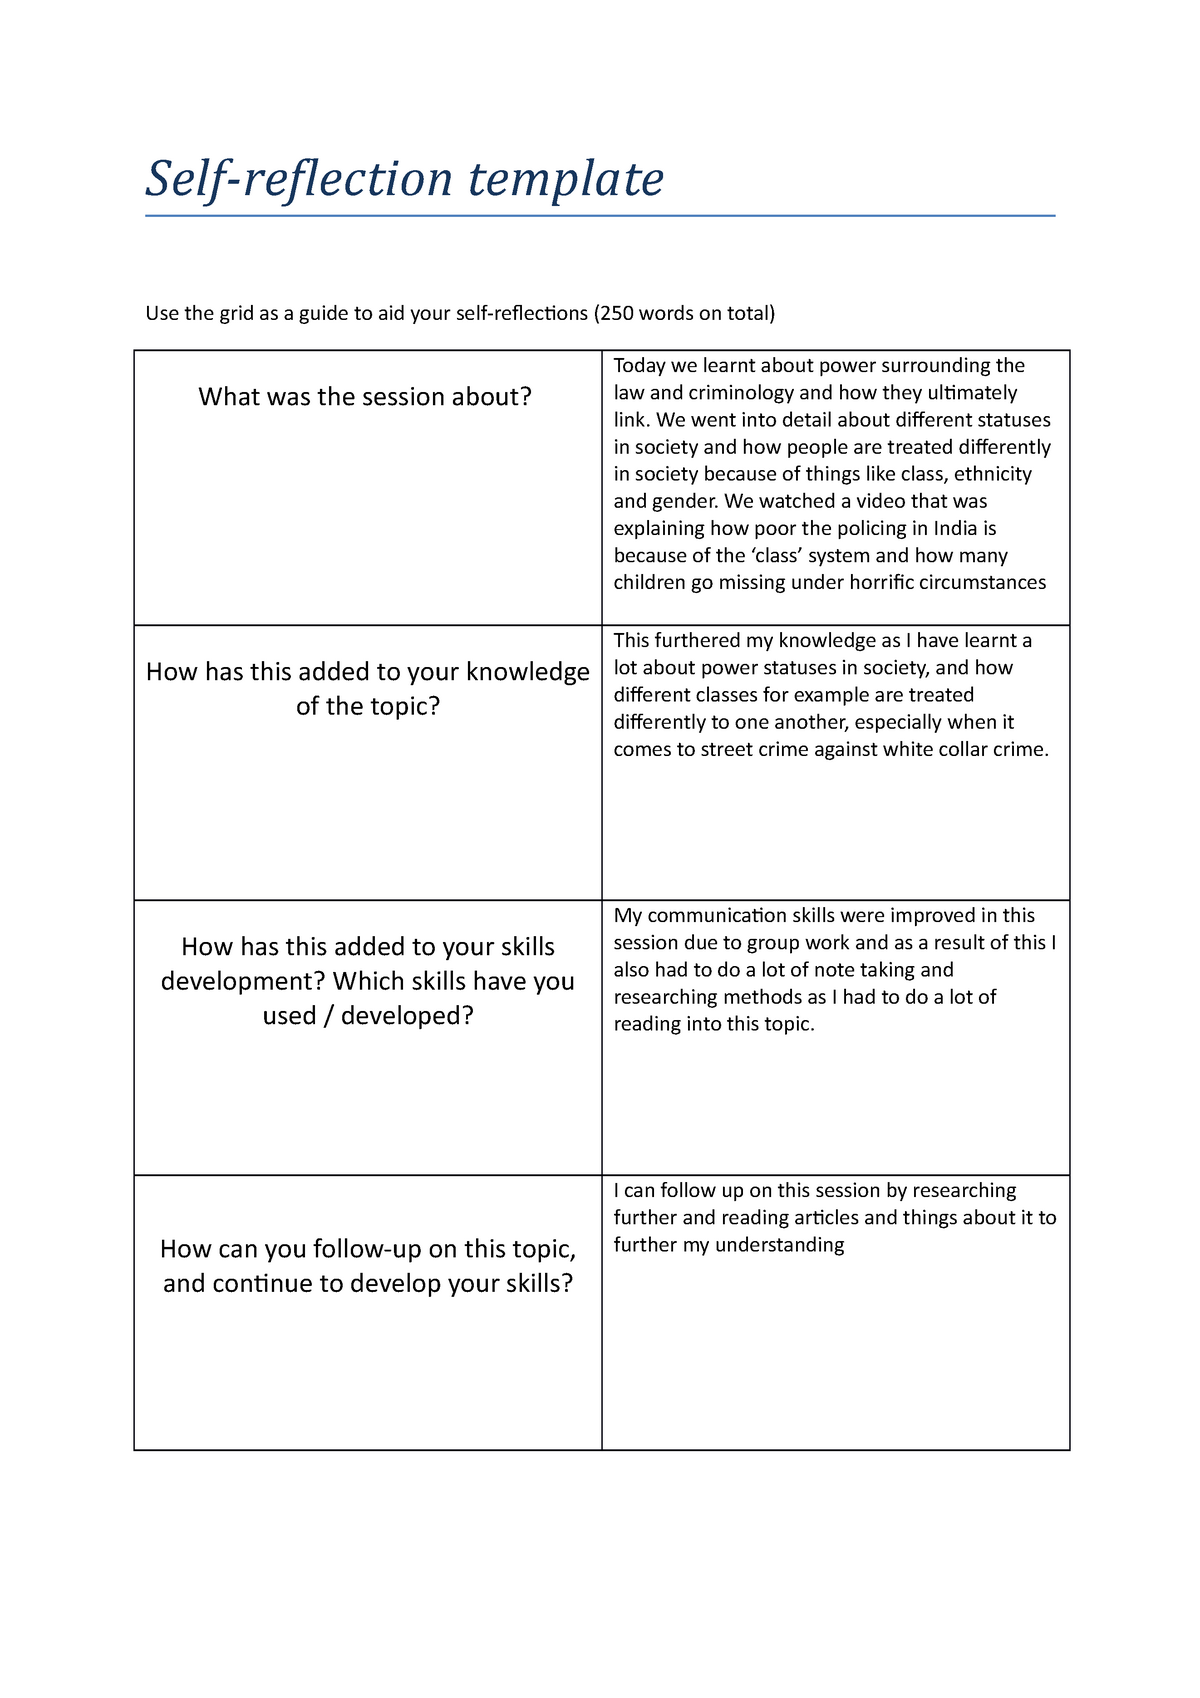 book-reflection-template